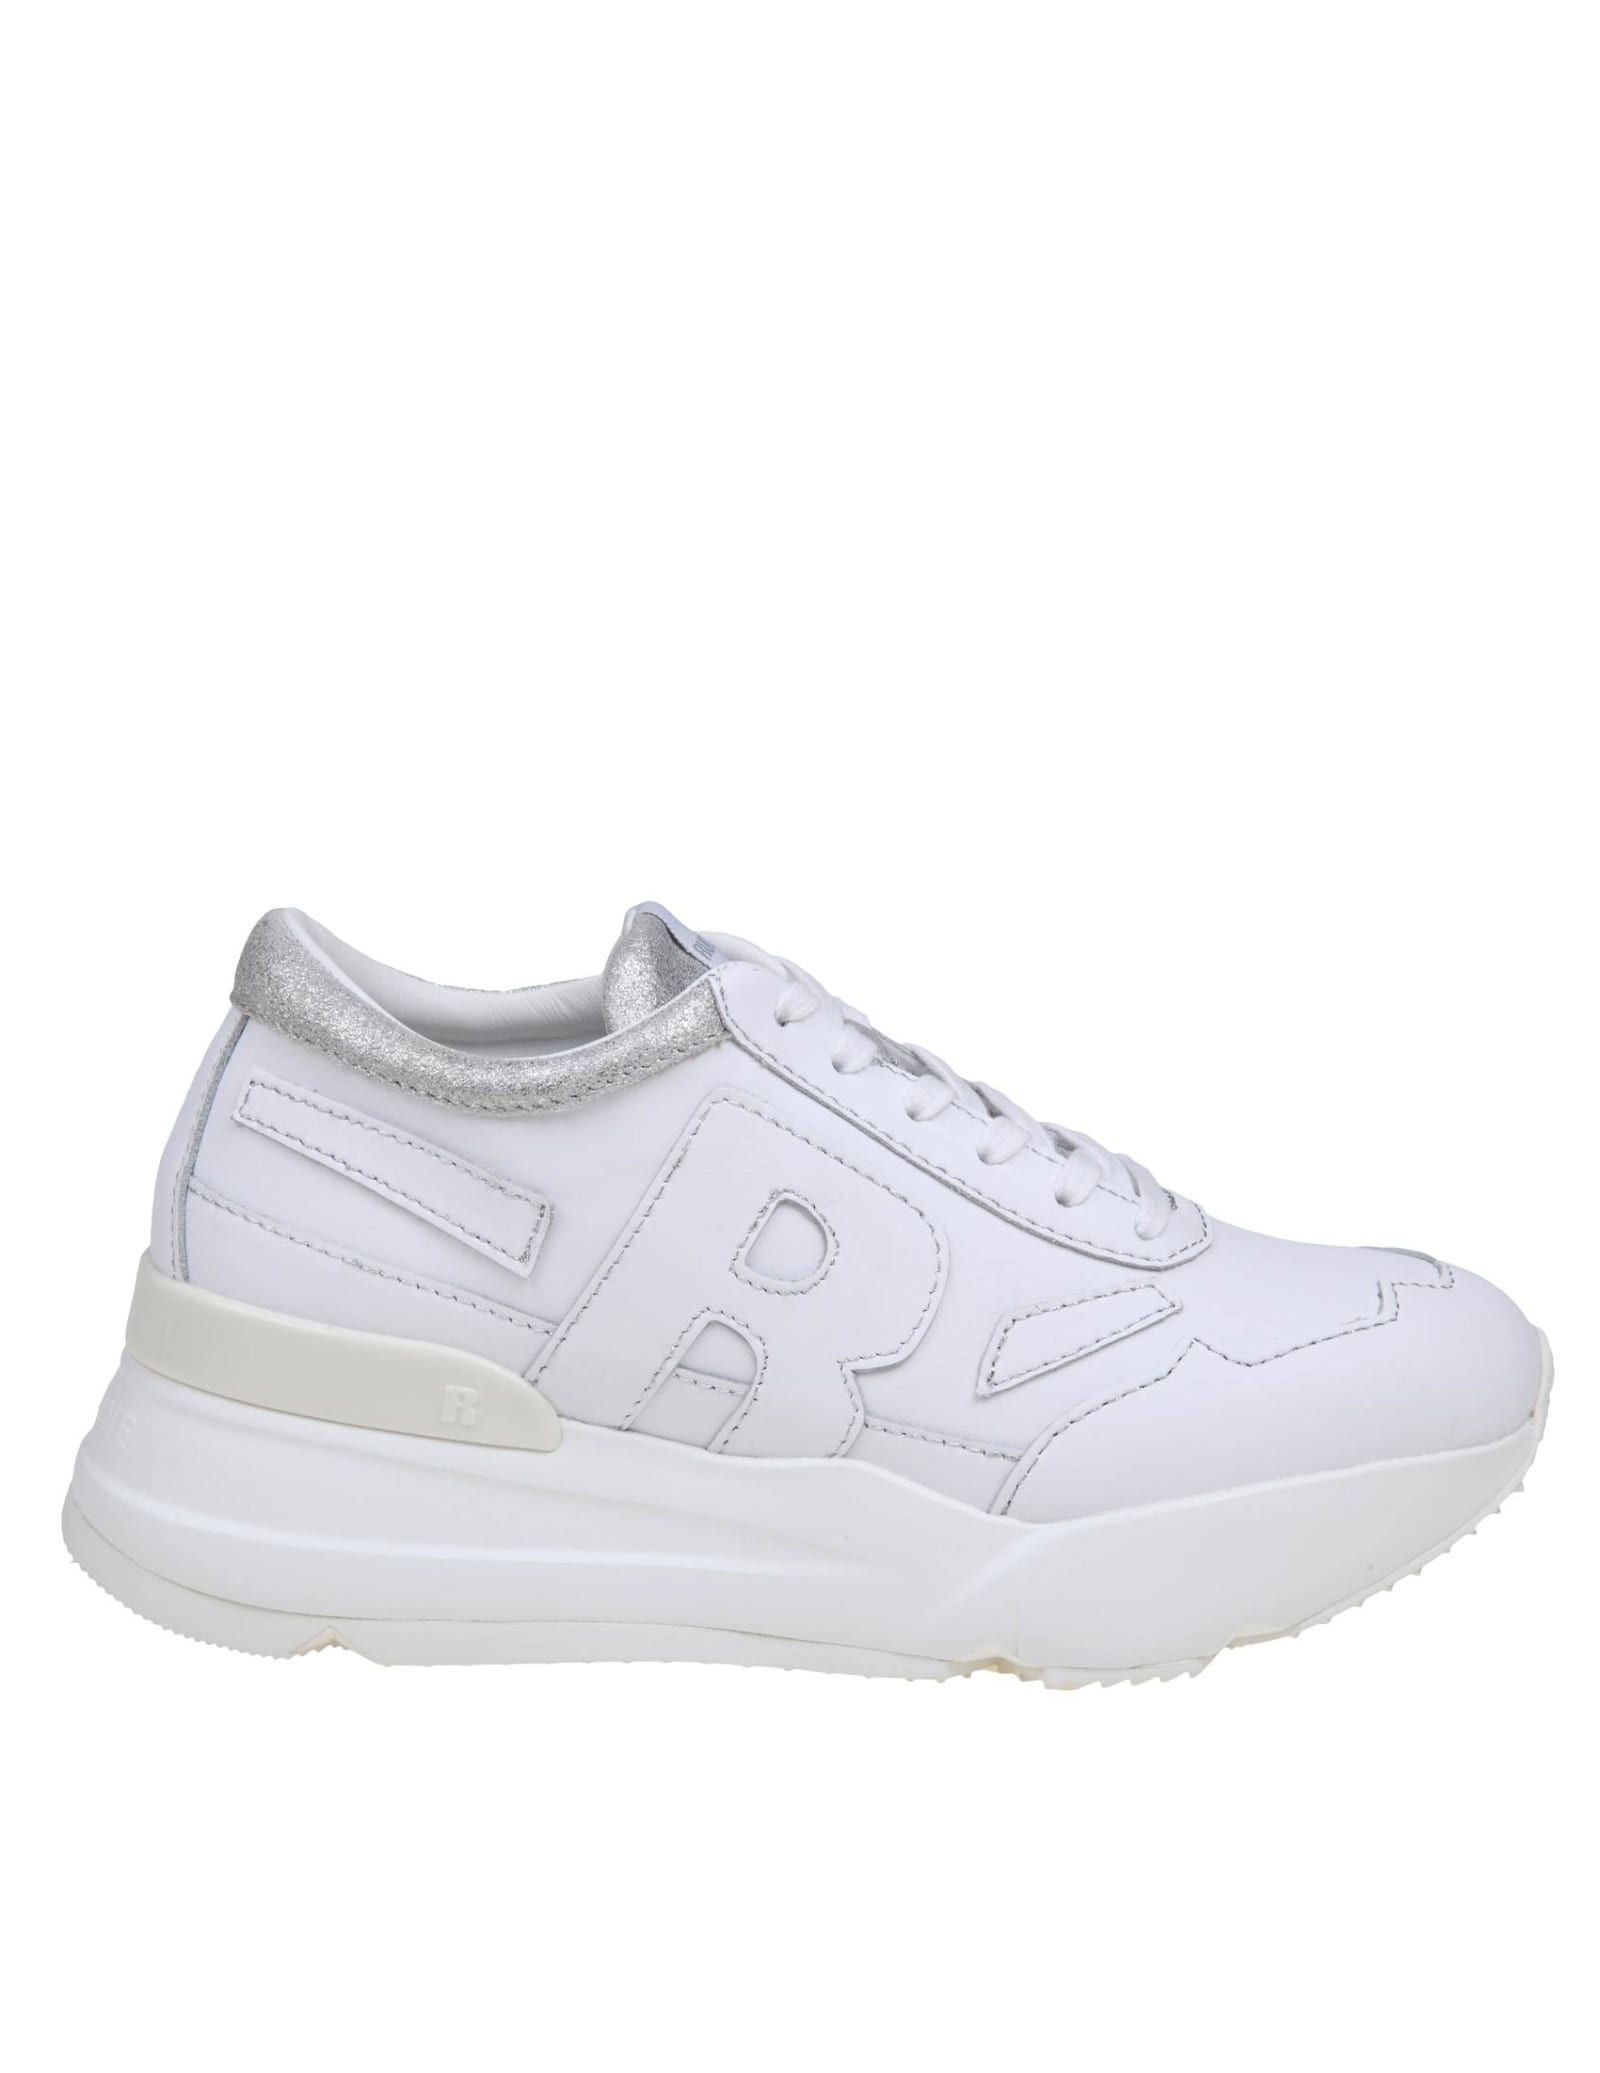 Ruco Line White Leather Sneakers